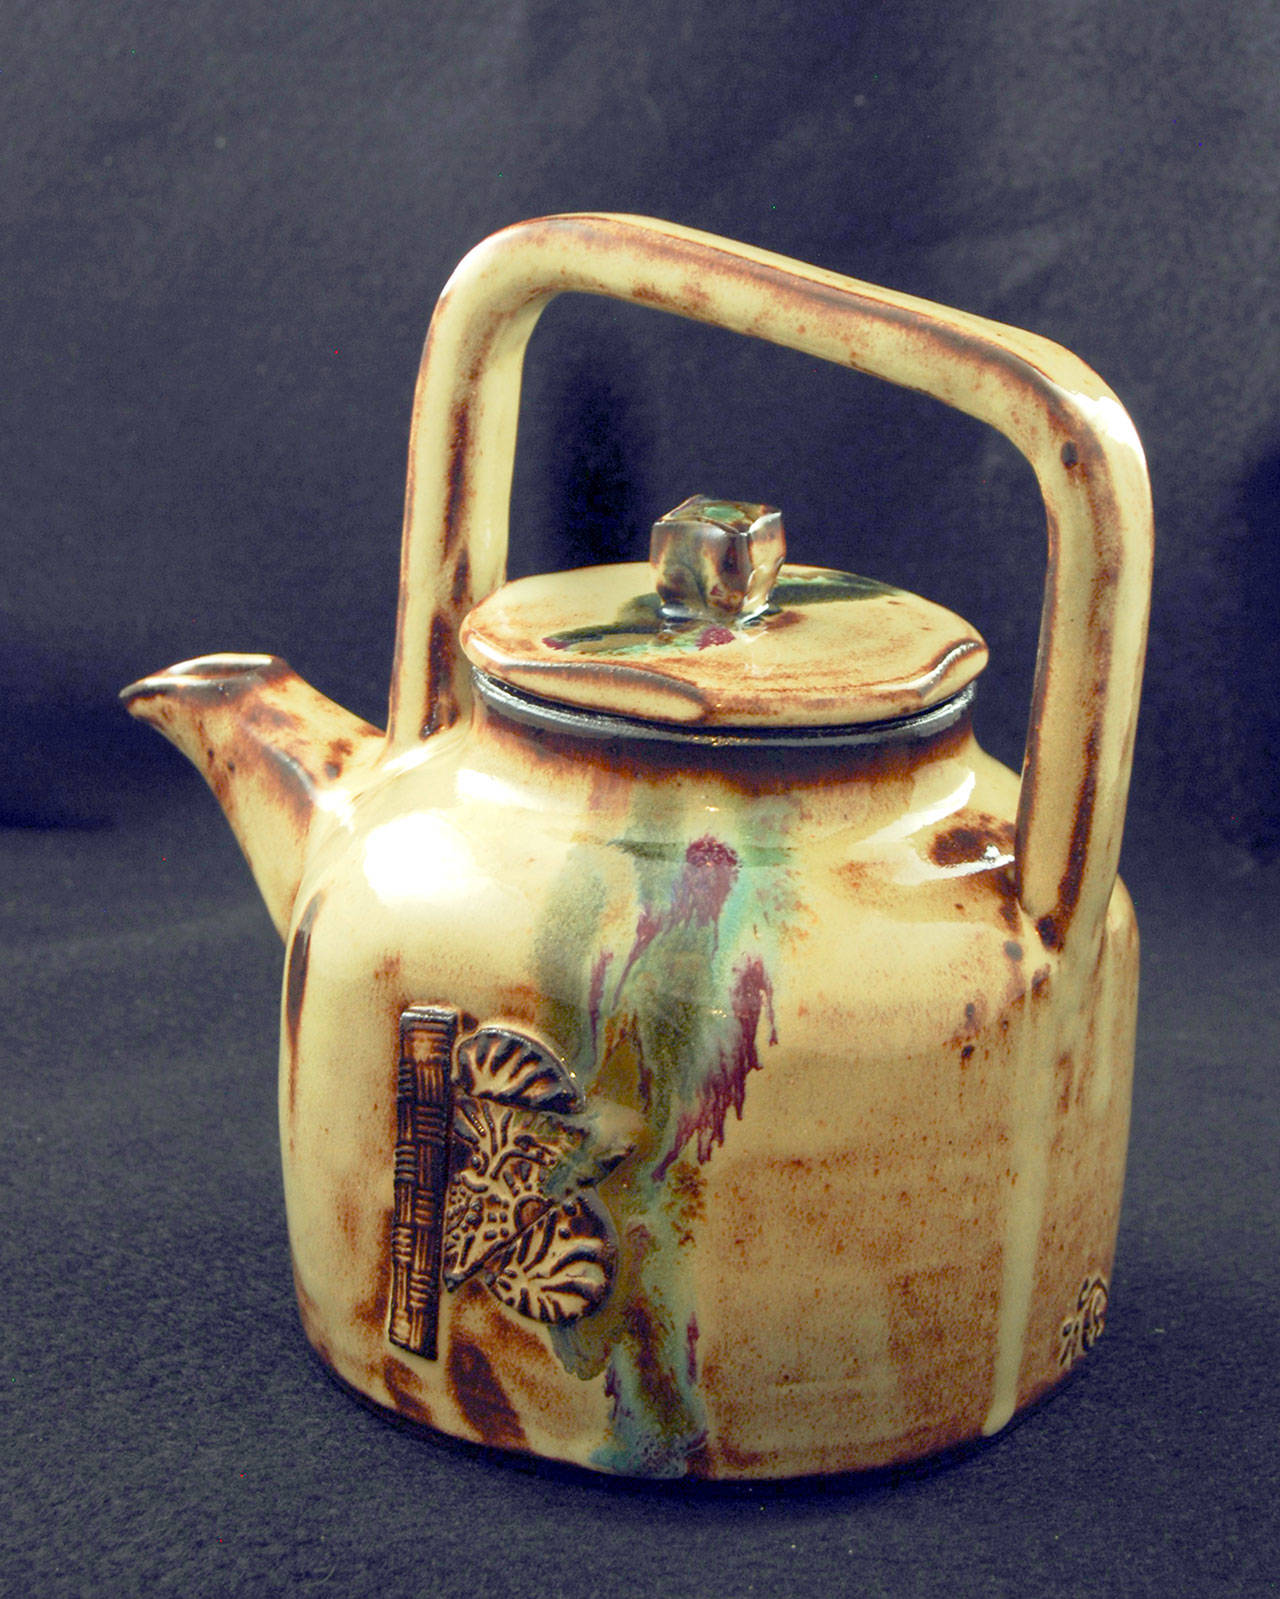 A teapot by Cindy Elstrom will be exhibited in the Bring Your Own Art Show at Studio Bob.